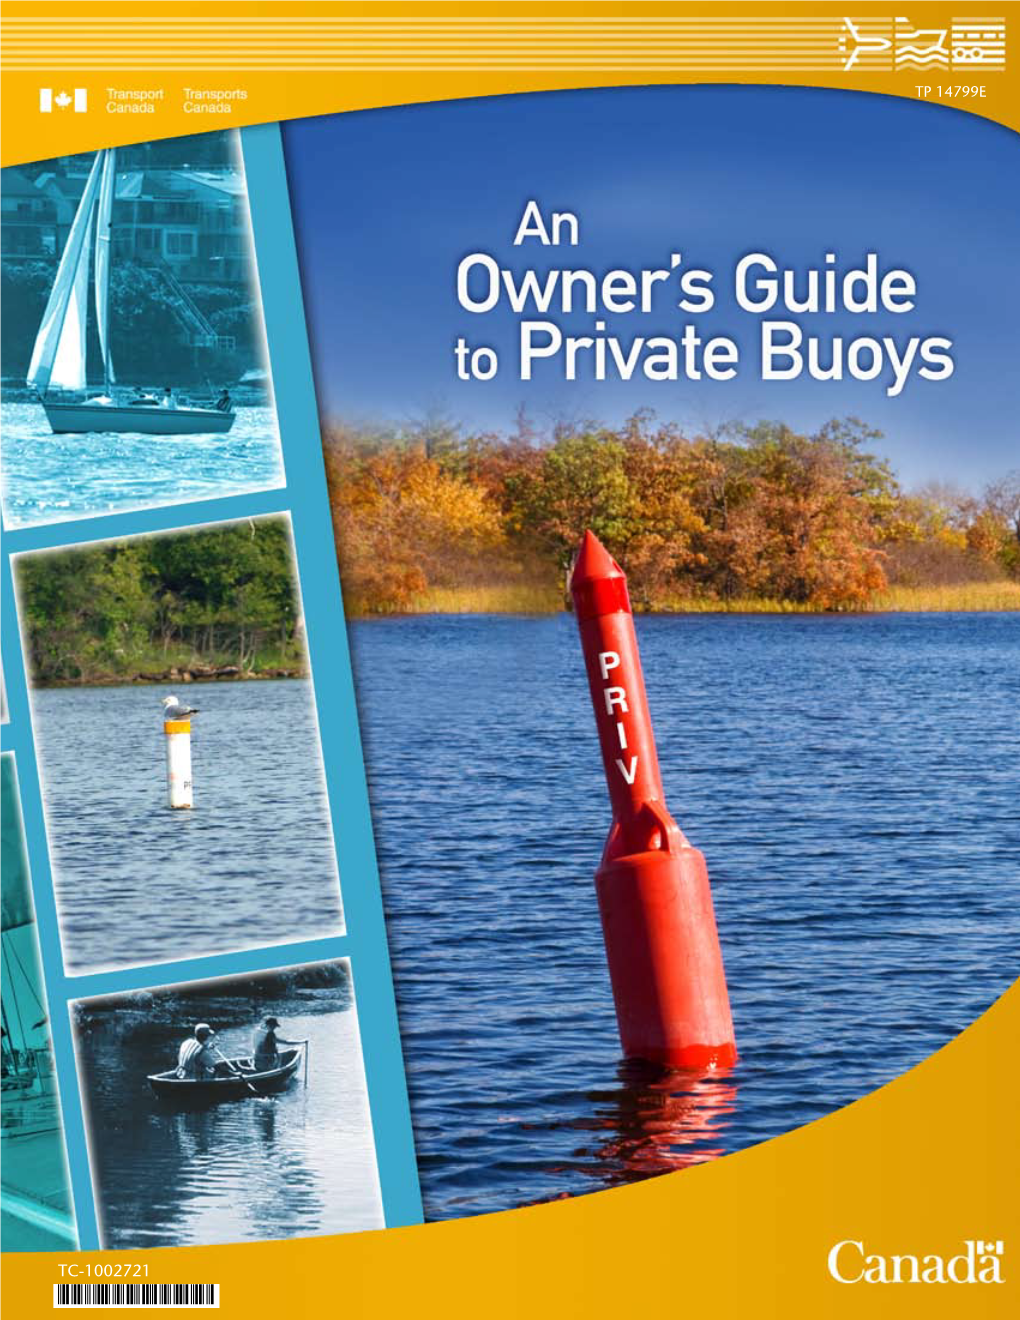 An Owner's Guide to Private Buoys (Transport Canada)